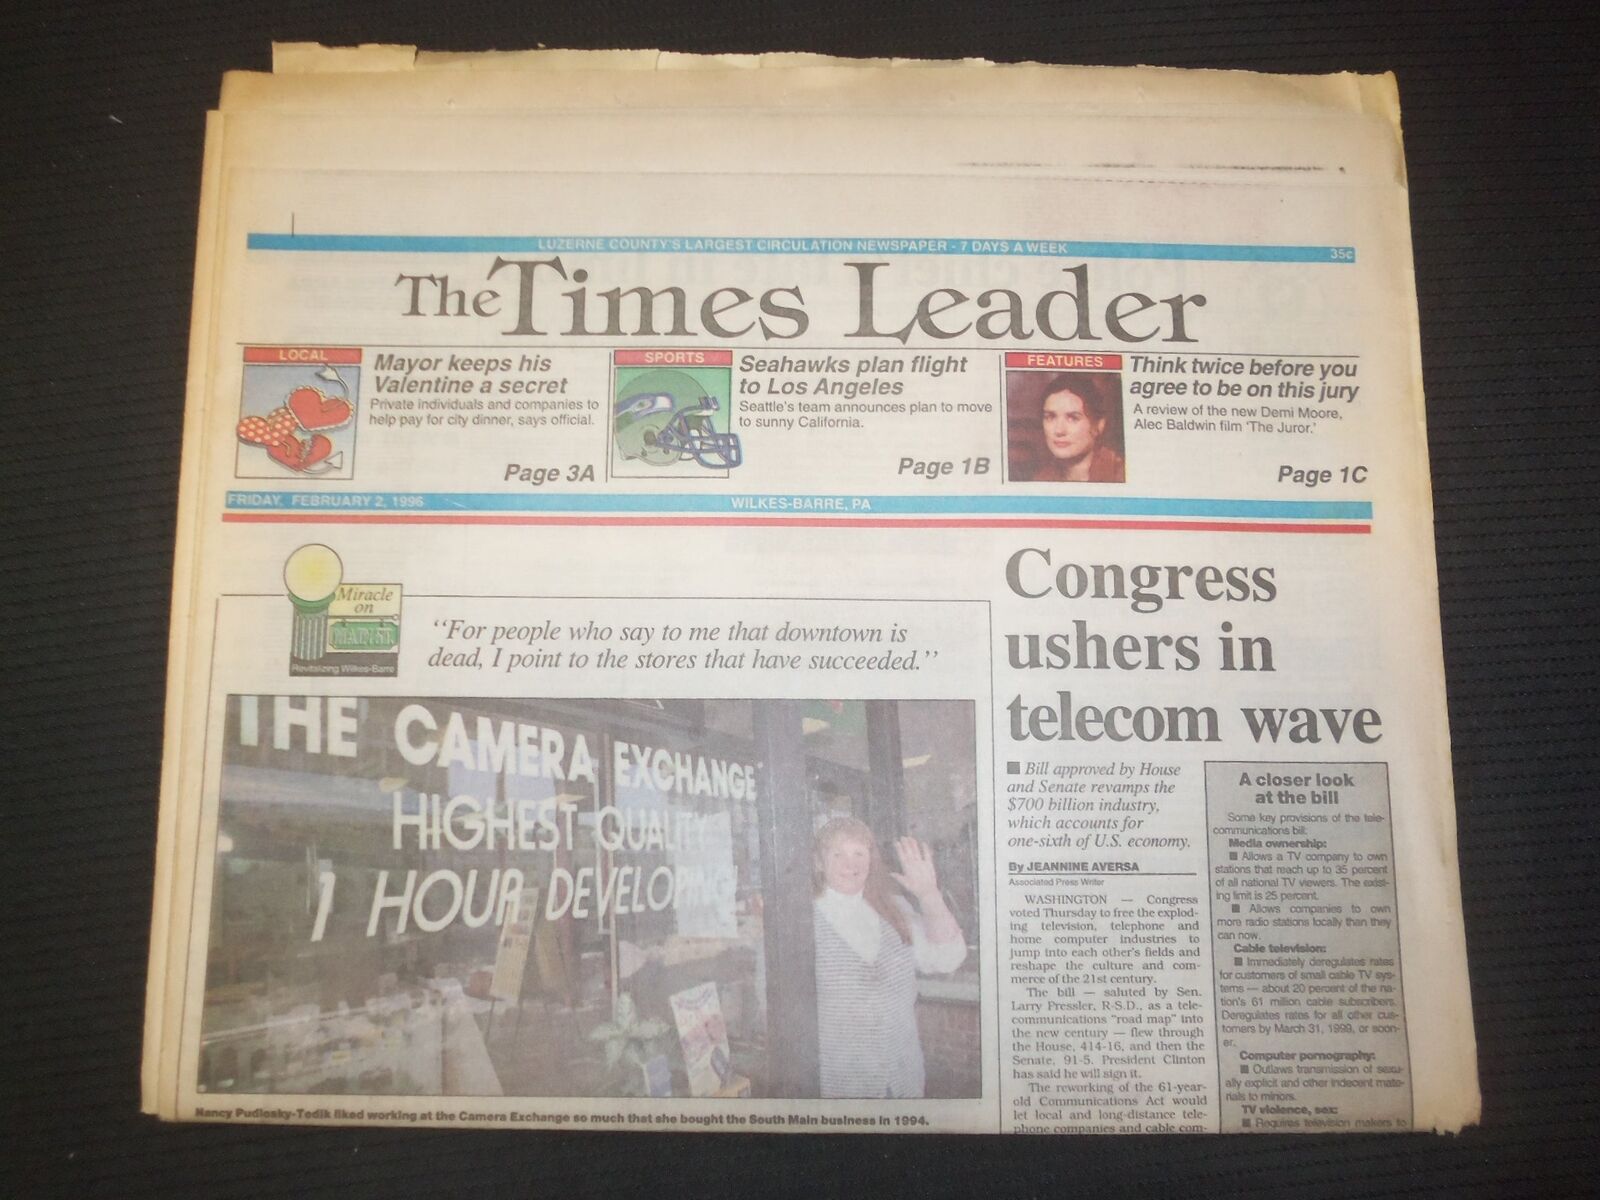 1996 FEB 2 WILKES-BARRE TIMES LEADER - CONGRESS USHERS IN TELECOM WAVE - NP 7605